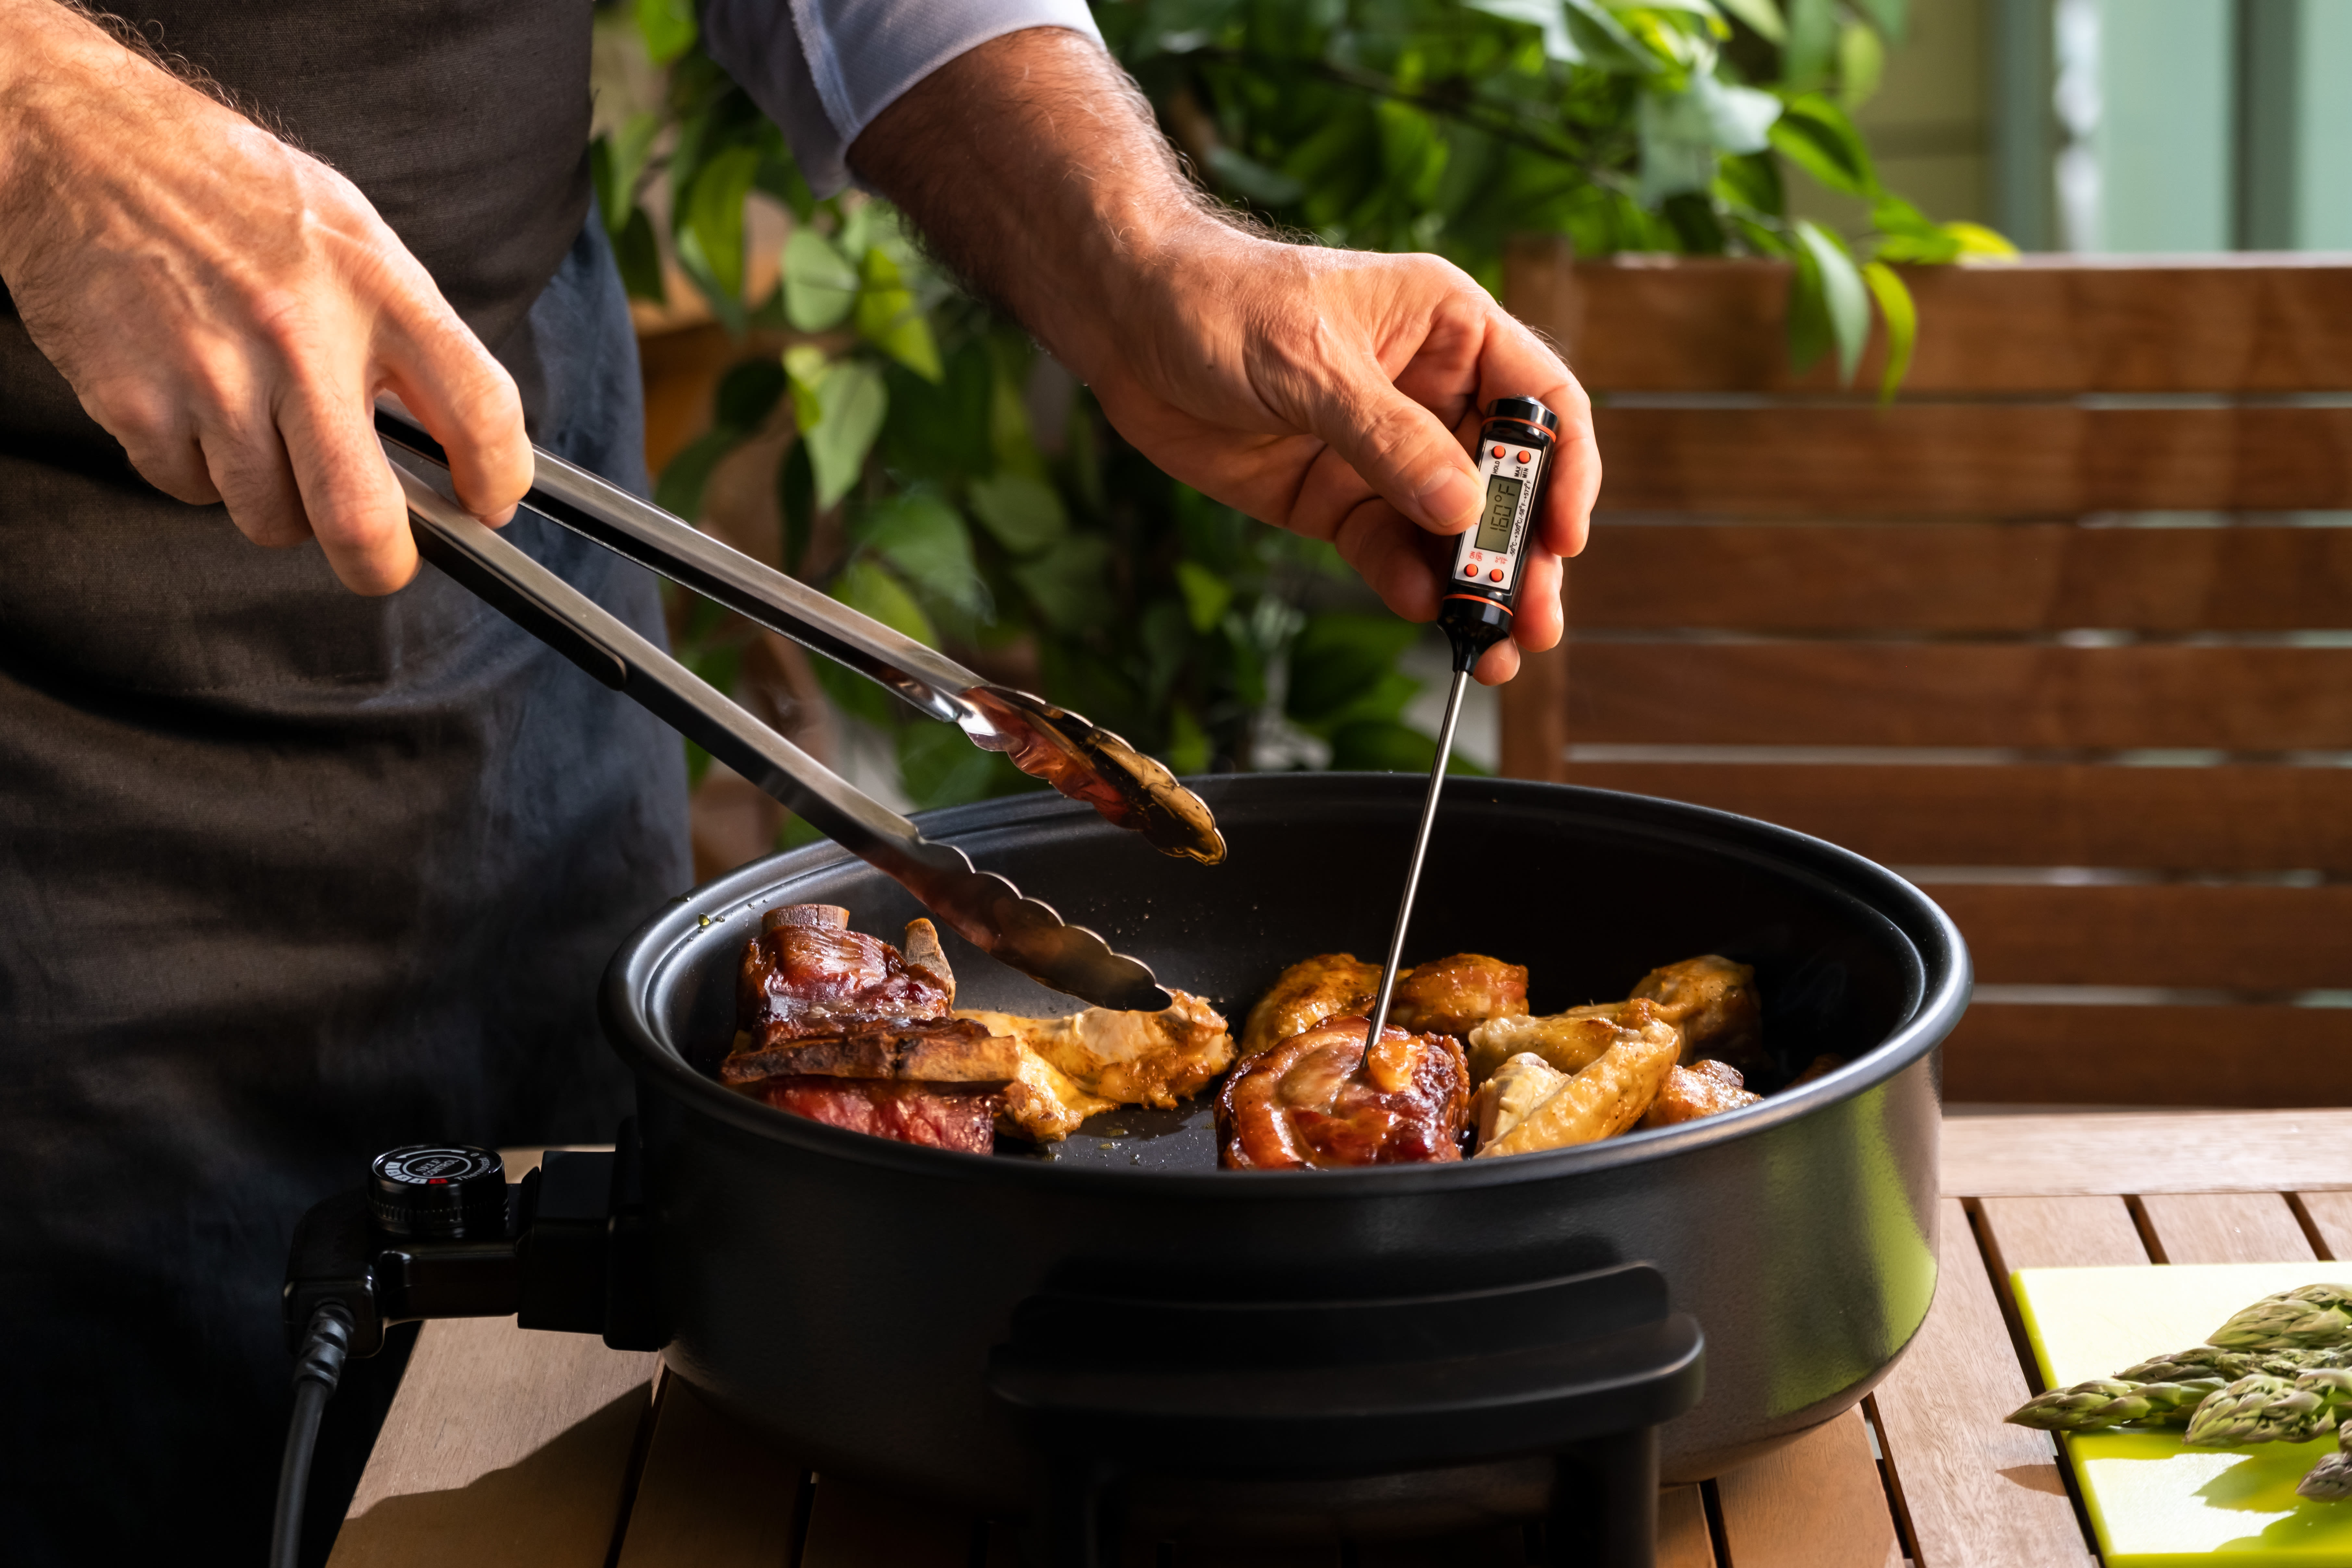 This 'game-changer' meat thermometer has over 120,000 reviews on Amazon — and it's on sale for $13